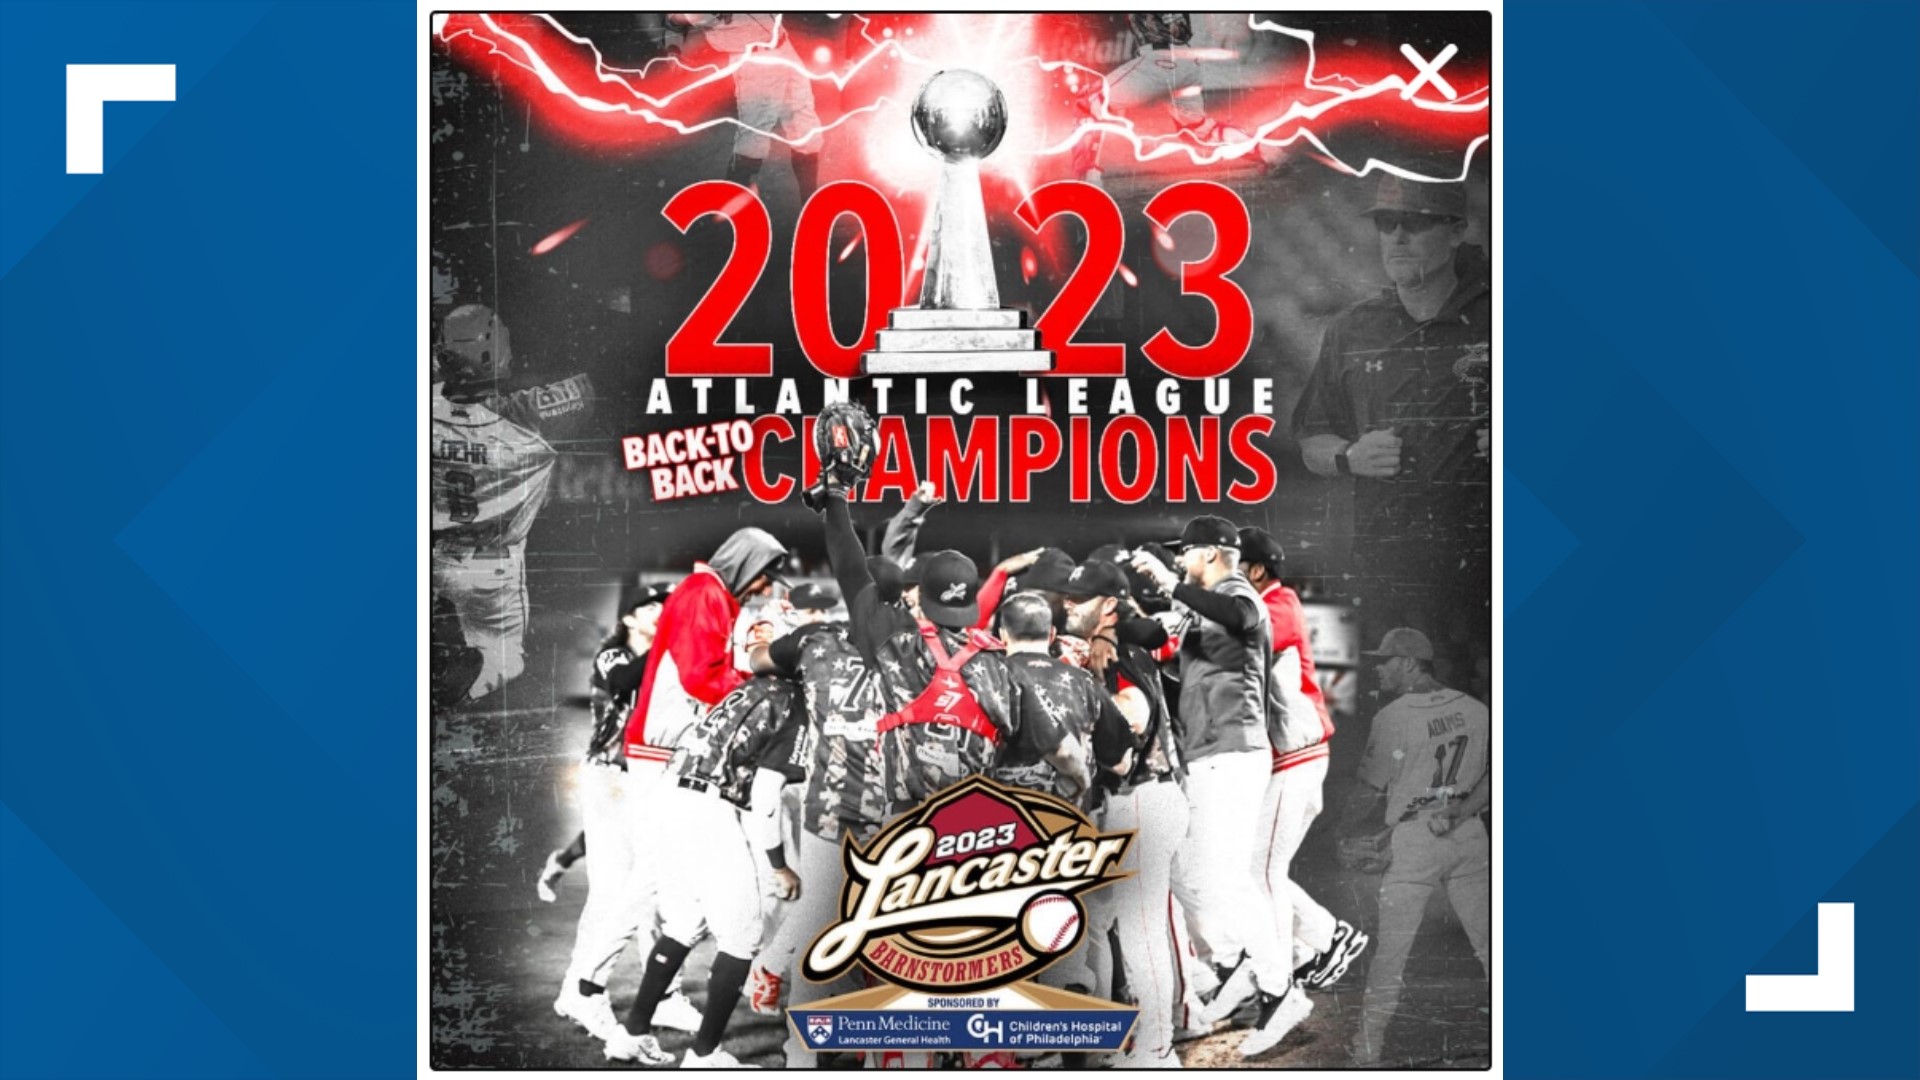 The win gives the Barnstormers their second consecutive Atlantic League title and the fourth in franchise history.